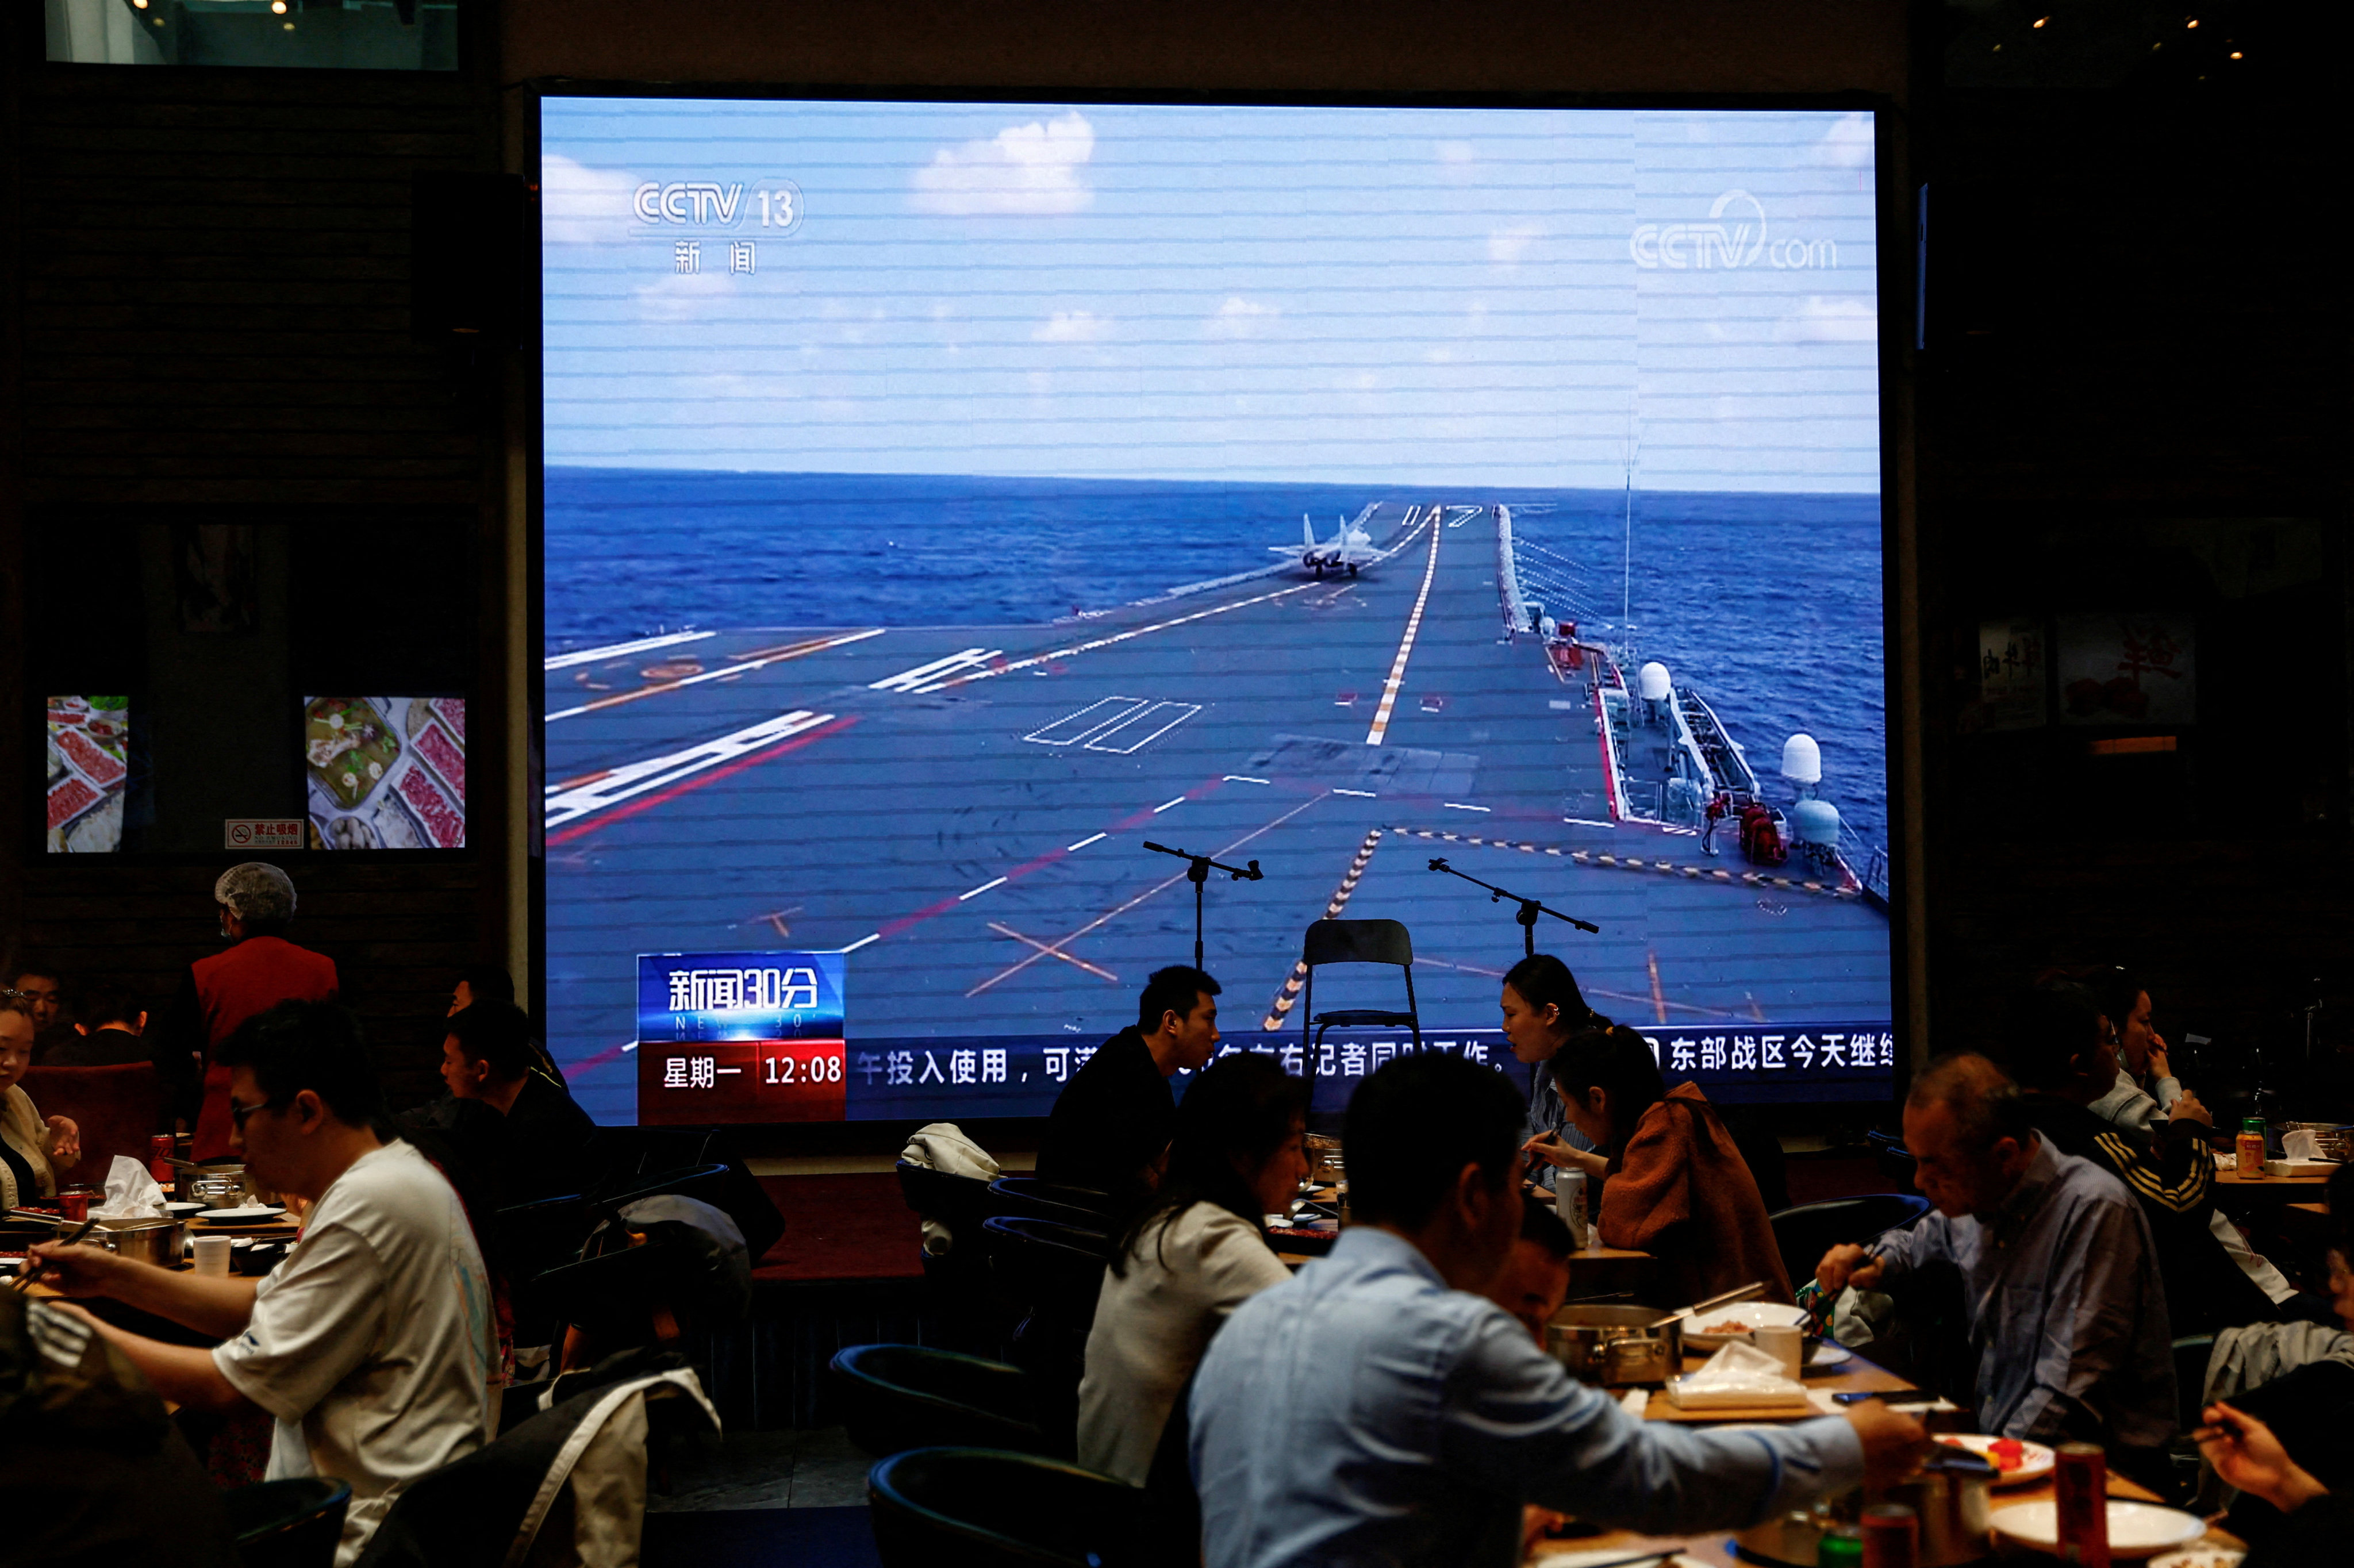 Customers in a Beijing restaurant dine as a giant screen broadcasts news footage of an aircraft taking off from the Shandong aircraft carrier as part of “Joint Sword” exercises around Taiwan by the People’s Liberation Army, on April 10. Photo: Reuters